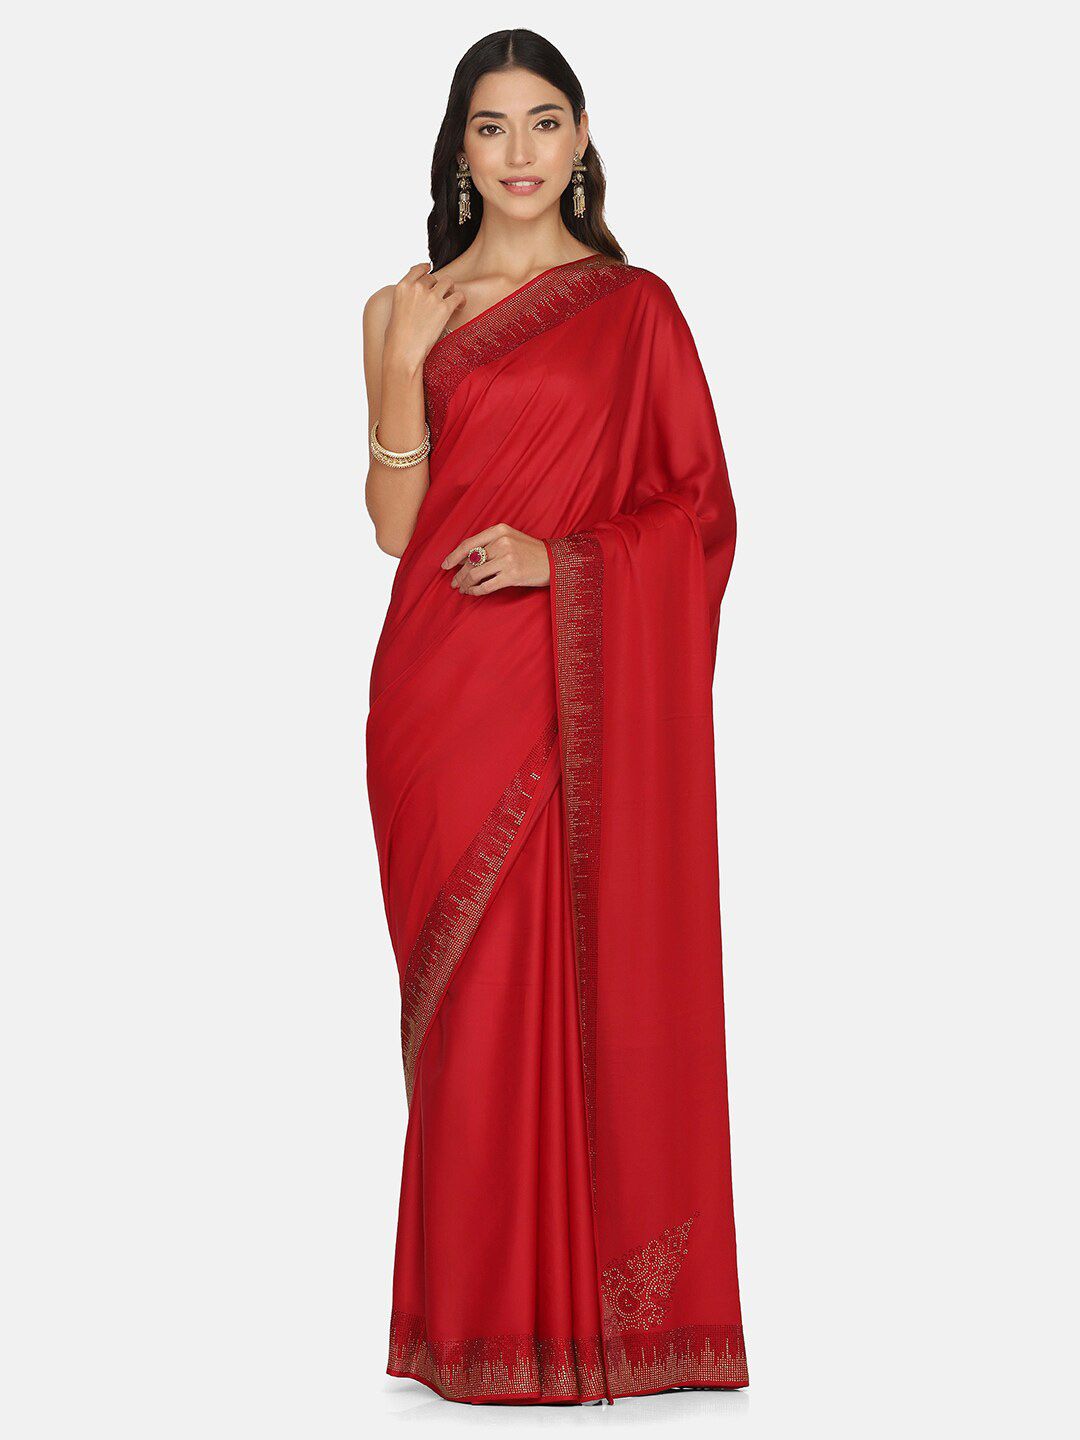 BOMBAY SELECTIONS Maroon Solid Embellished Satin Saree Price in India